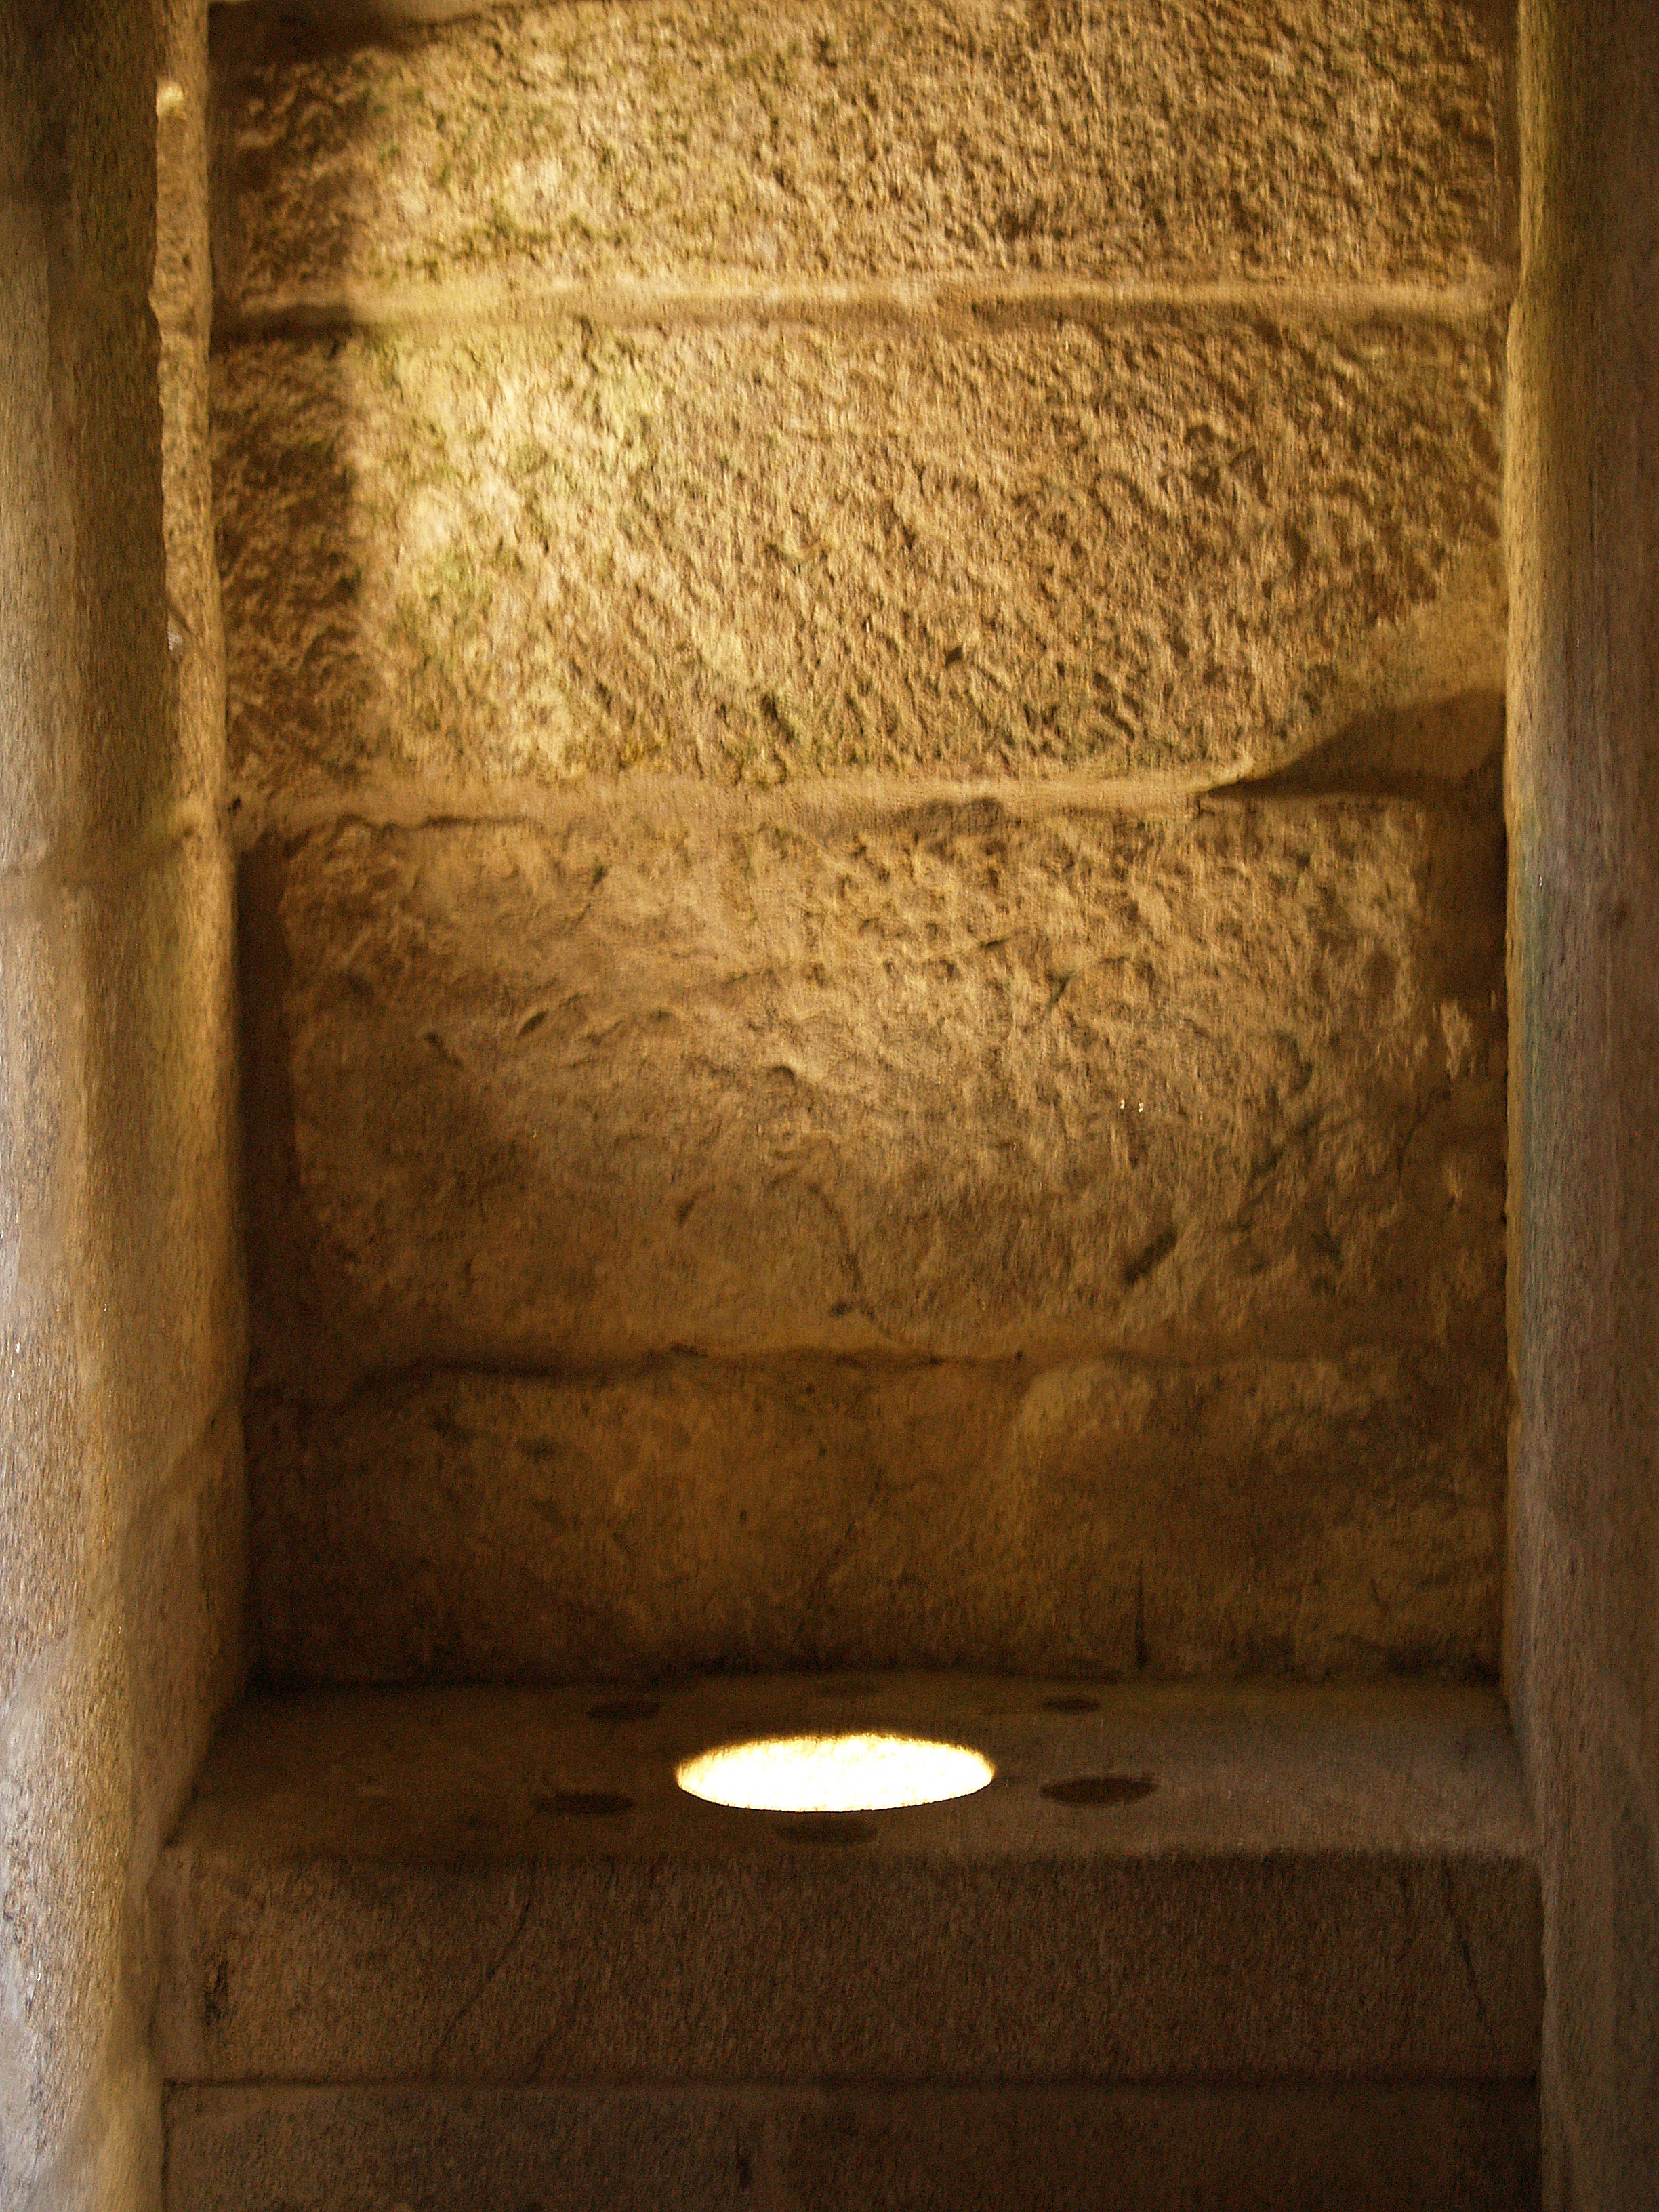 Stone chamber with a circular opening on the floor allowing light into the dark interior